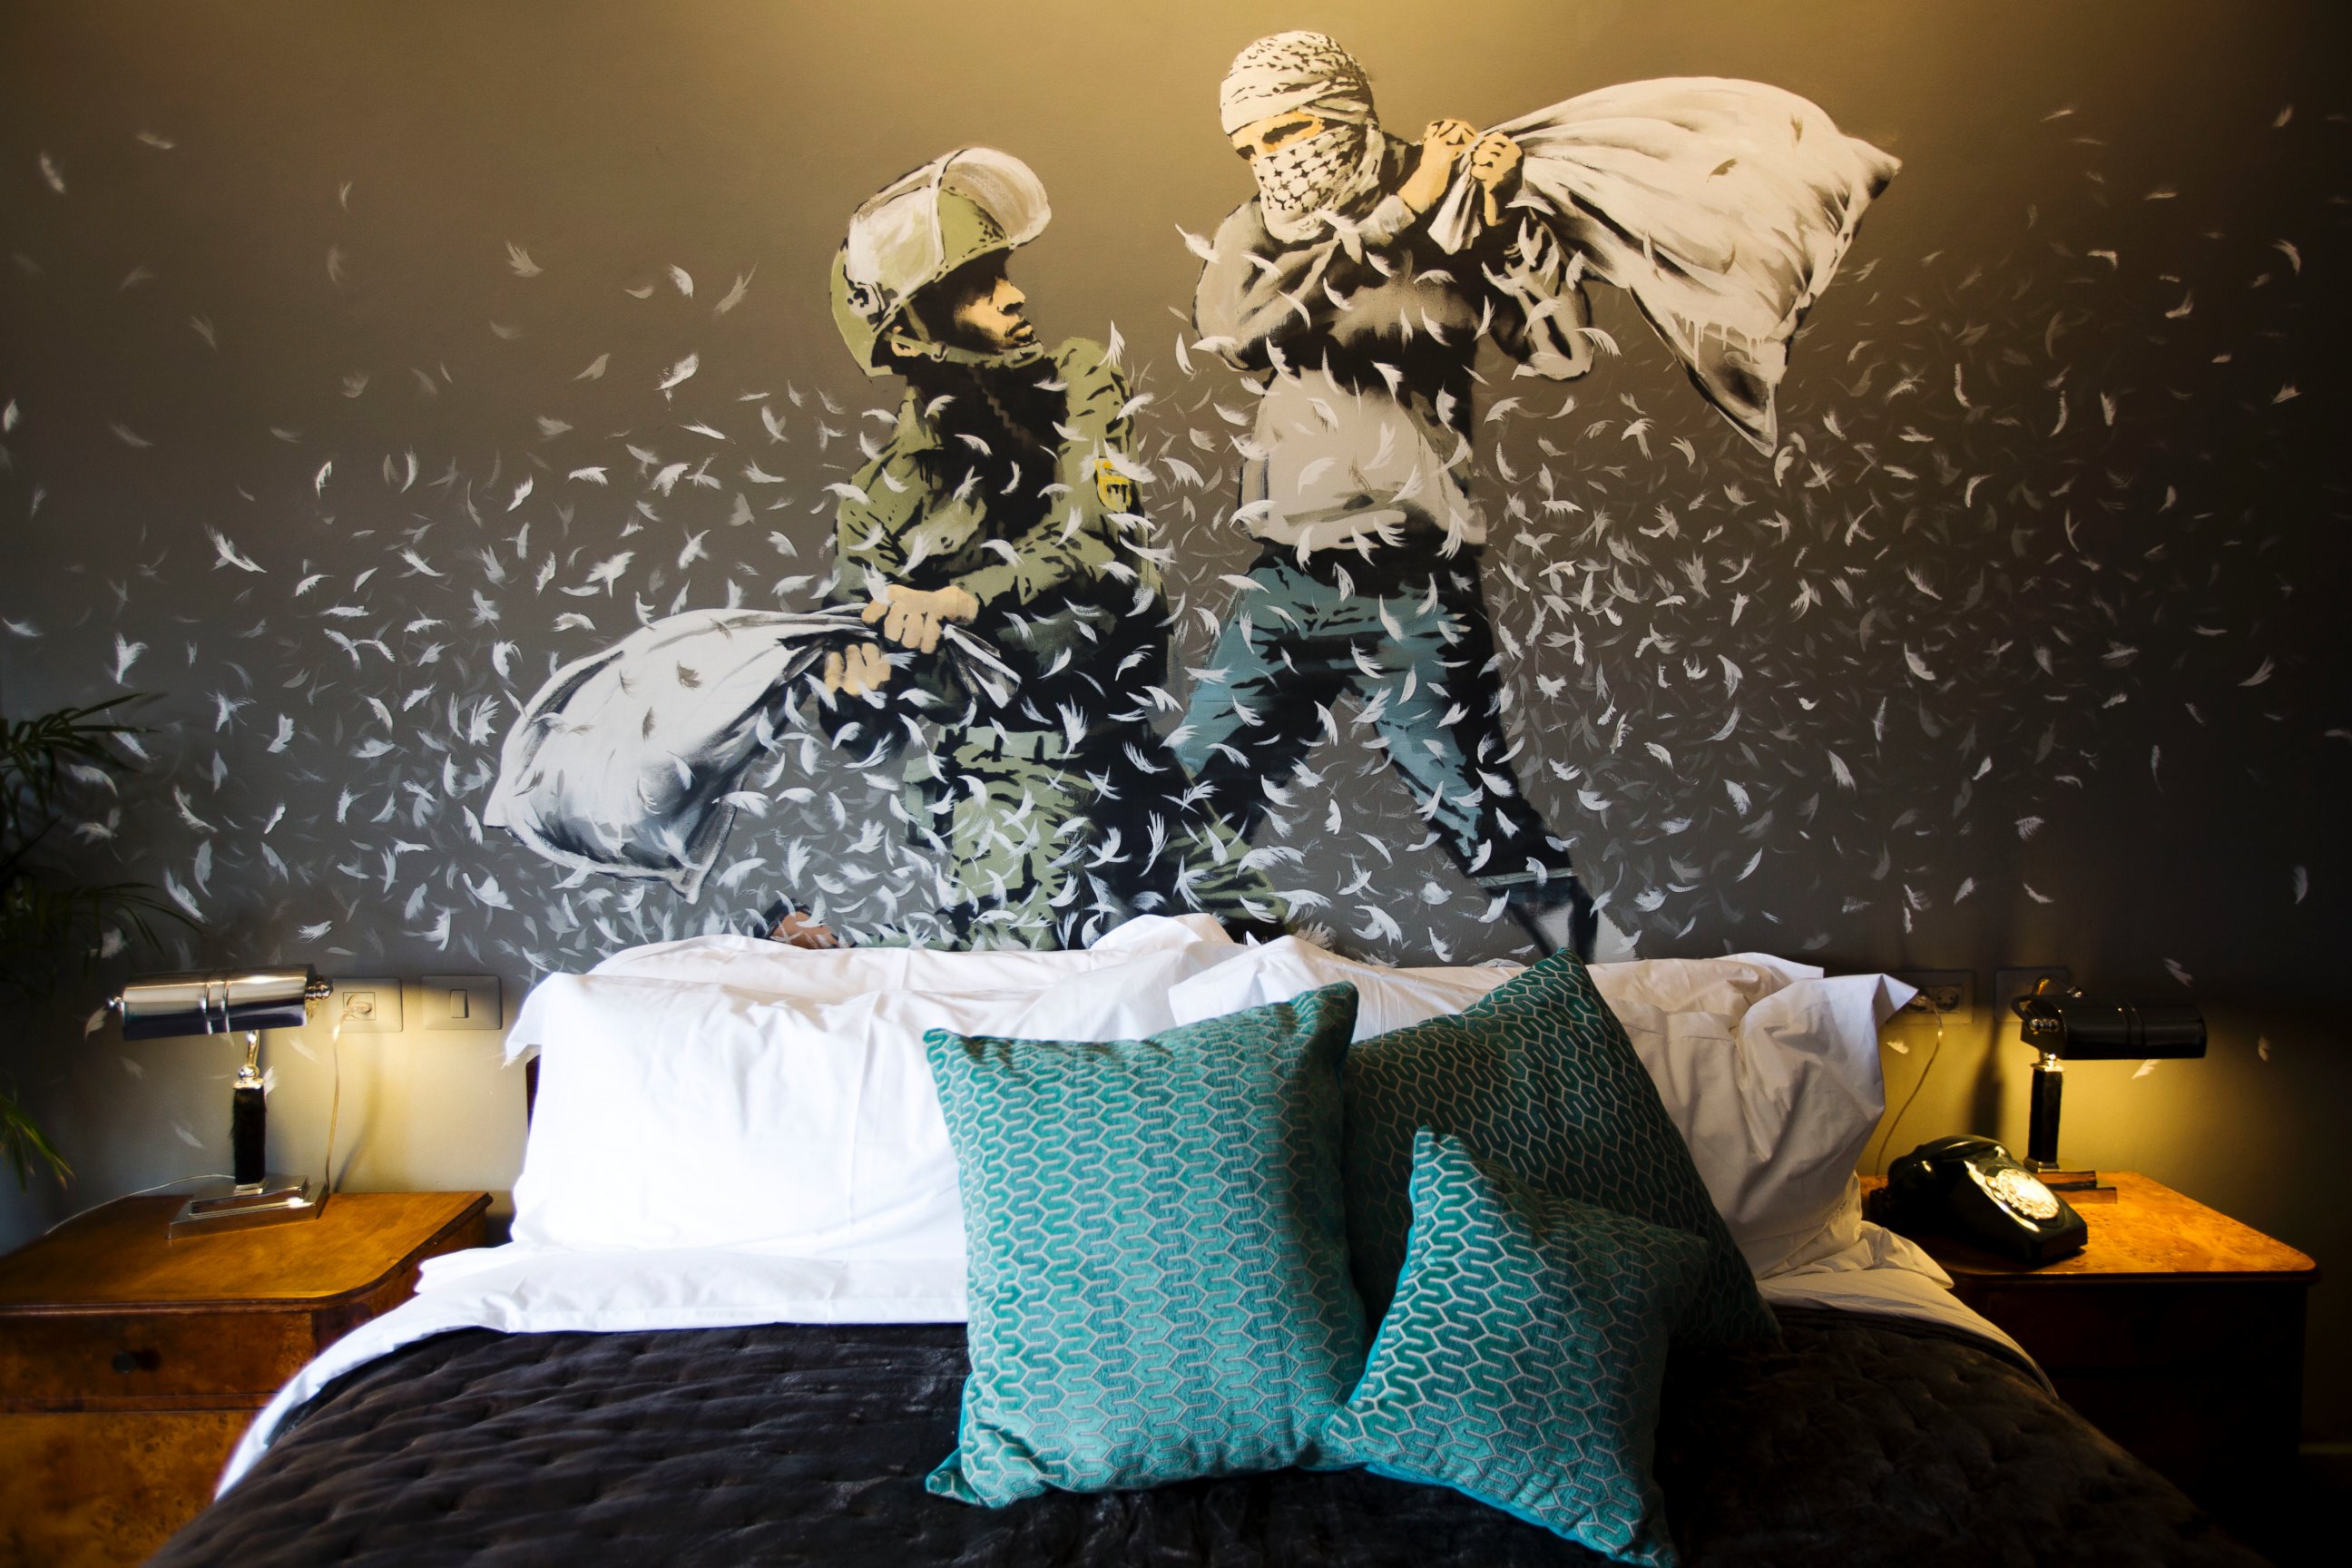 PHOTO: A Banksy wall painting showing Israeli border policeman and Palestinian in a pillow fight is seen in one of the rooms of the "The Walled Off Hotel" in the West Bank city of Bethlehem, March 3, 2017.